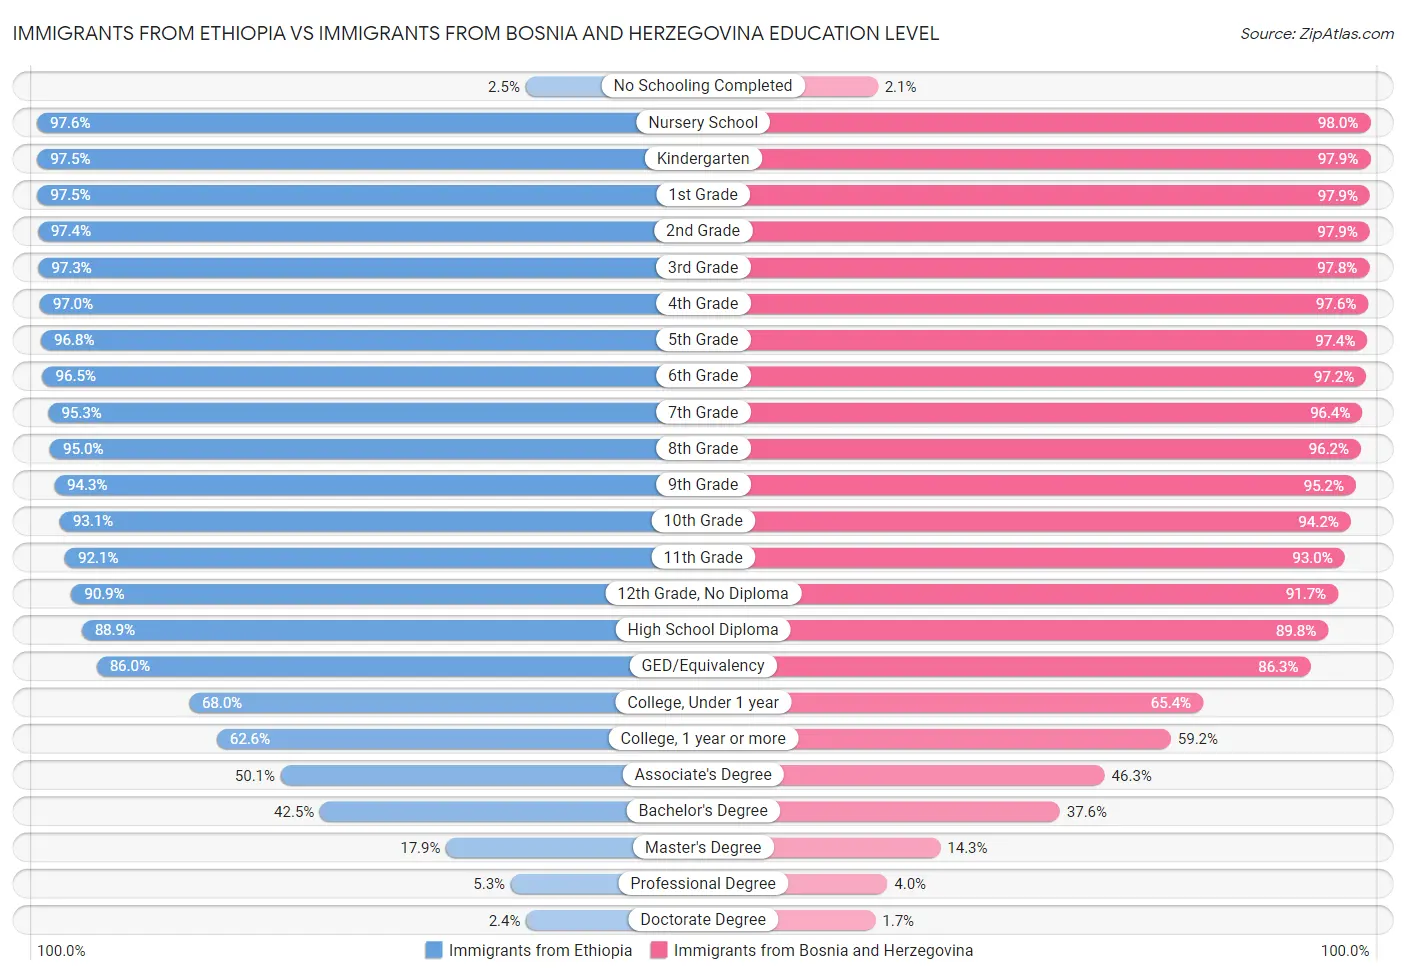 Immigrants from Ethiopia vs Immigrants from Bosnia and Herzegovina Education Level